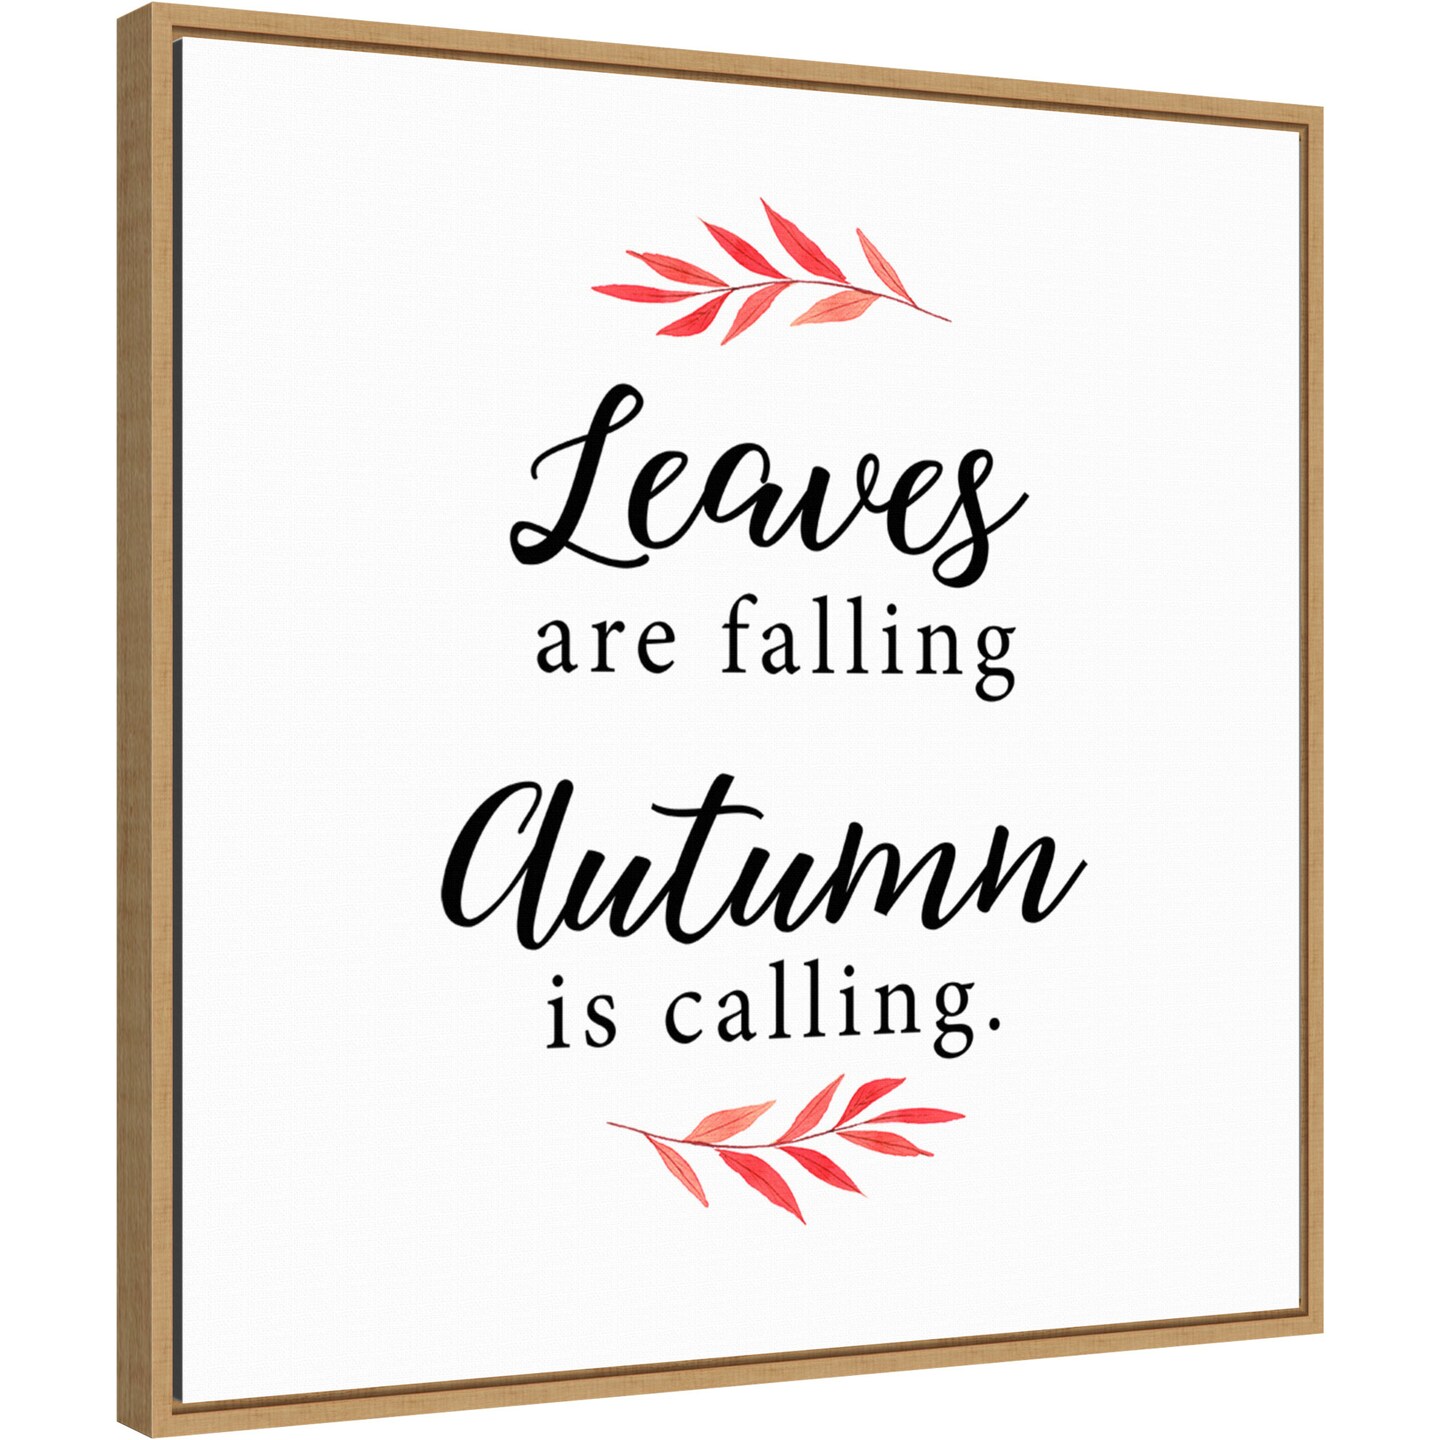 Autumn Is Calling Leaves by Amanti Art Portfolio 22-in. W x 22-in. H. Canvas Wall Art Print Framed in Natural